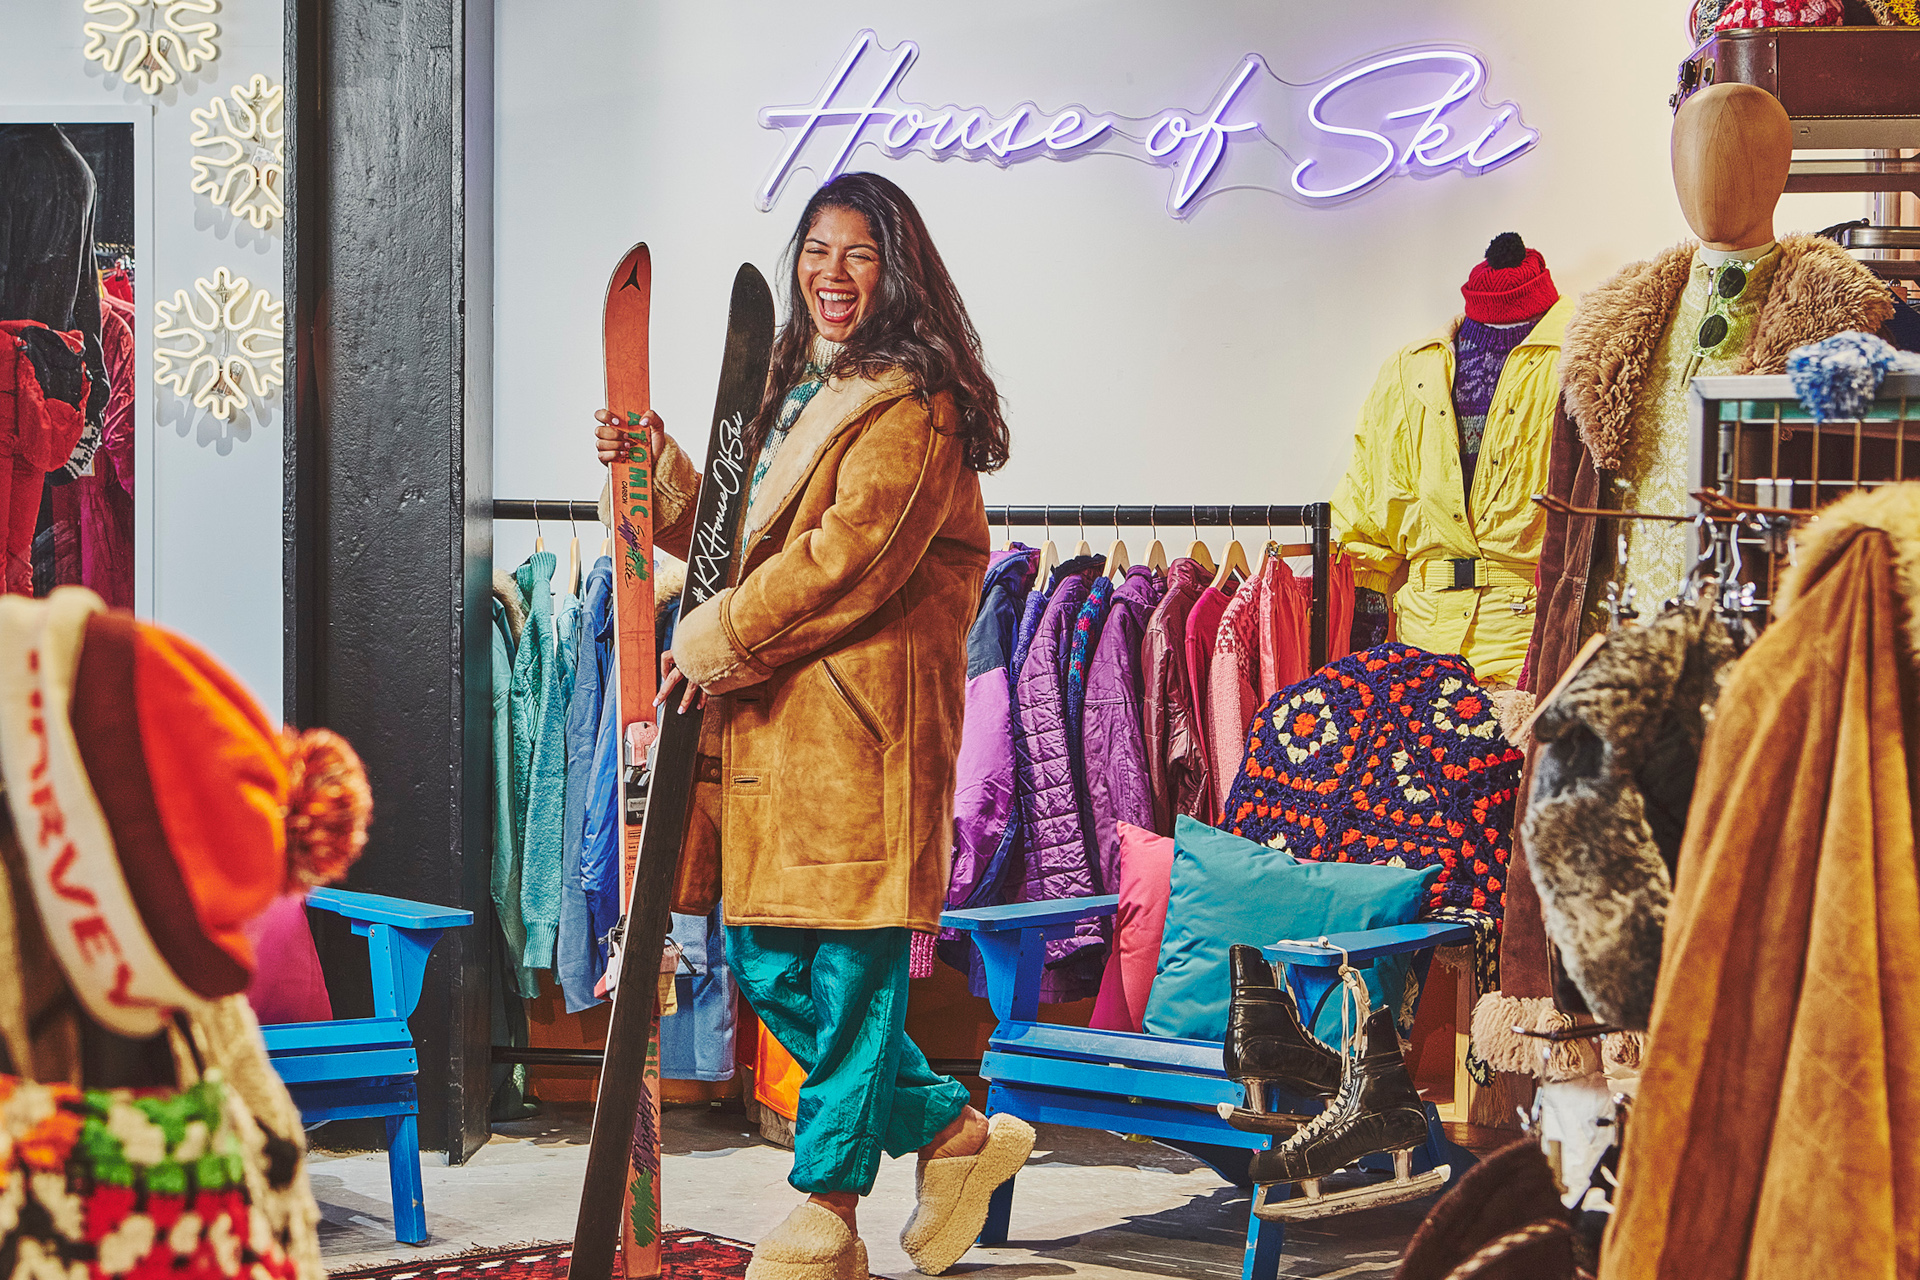 Last Weekend To Visit: House of Ski Is The Vintage Skiwear Pop-Up Coming To London